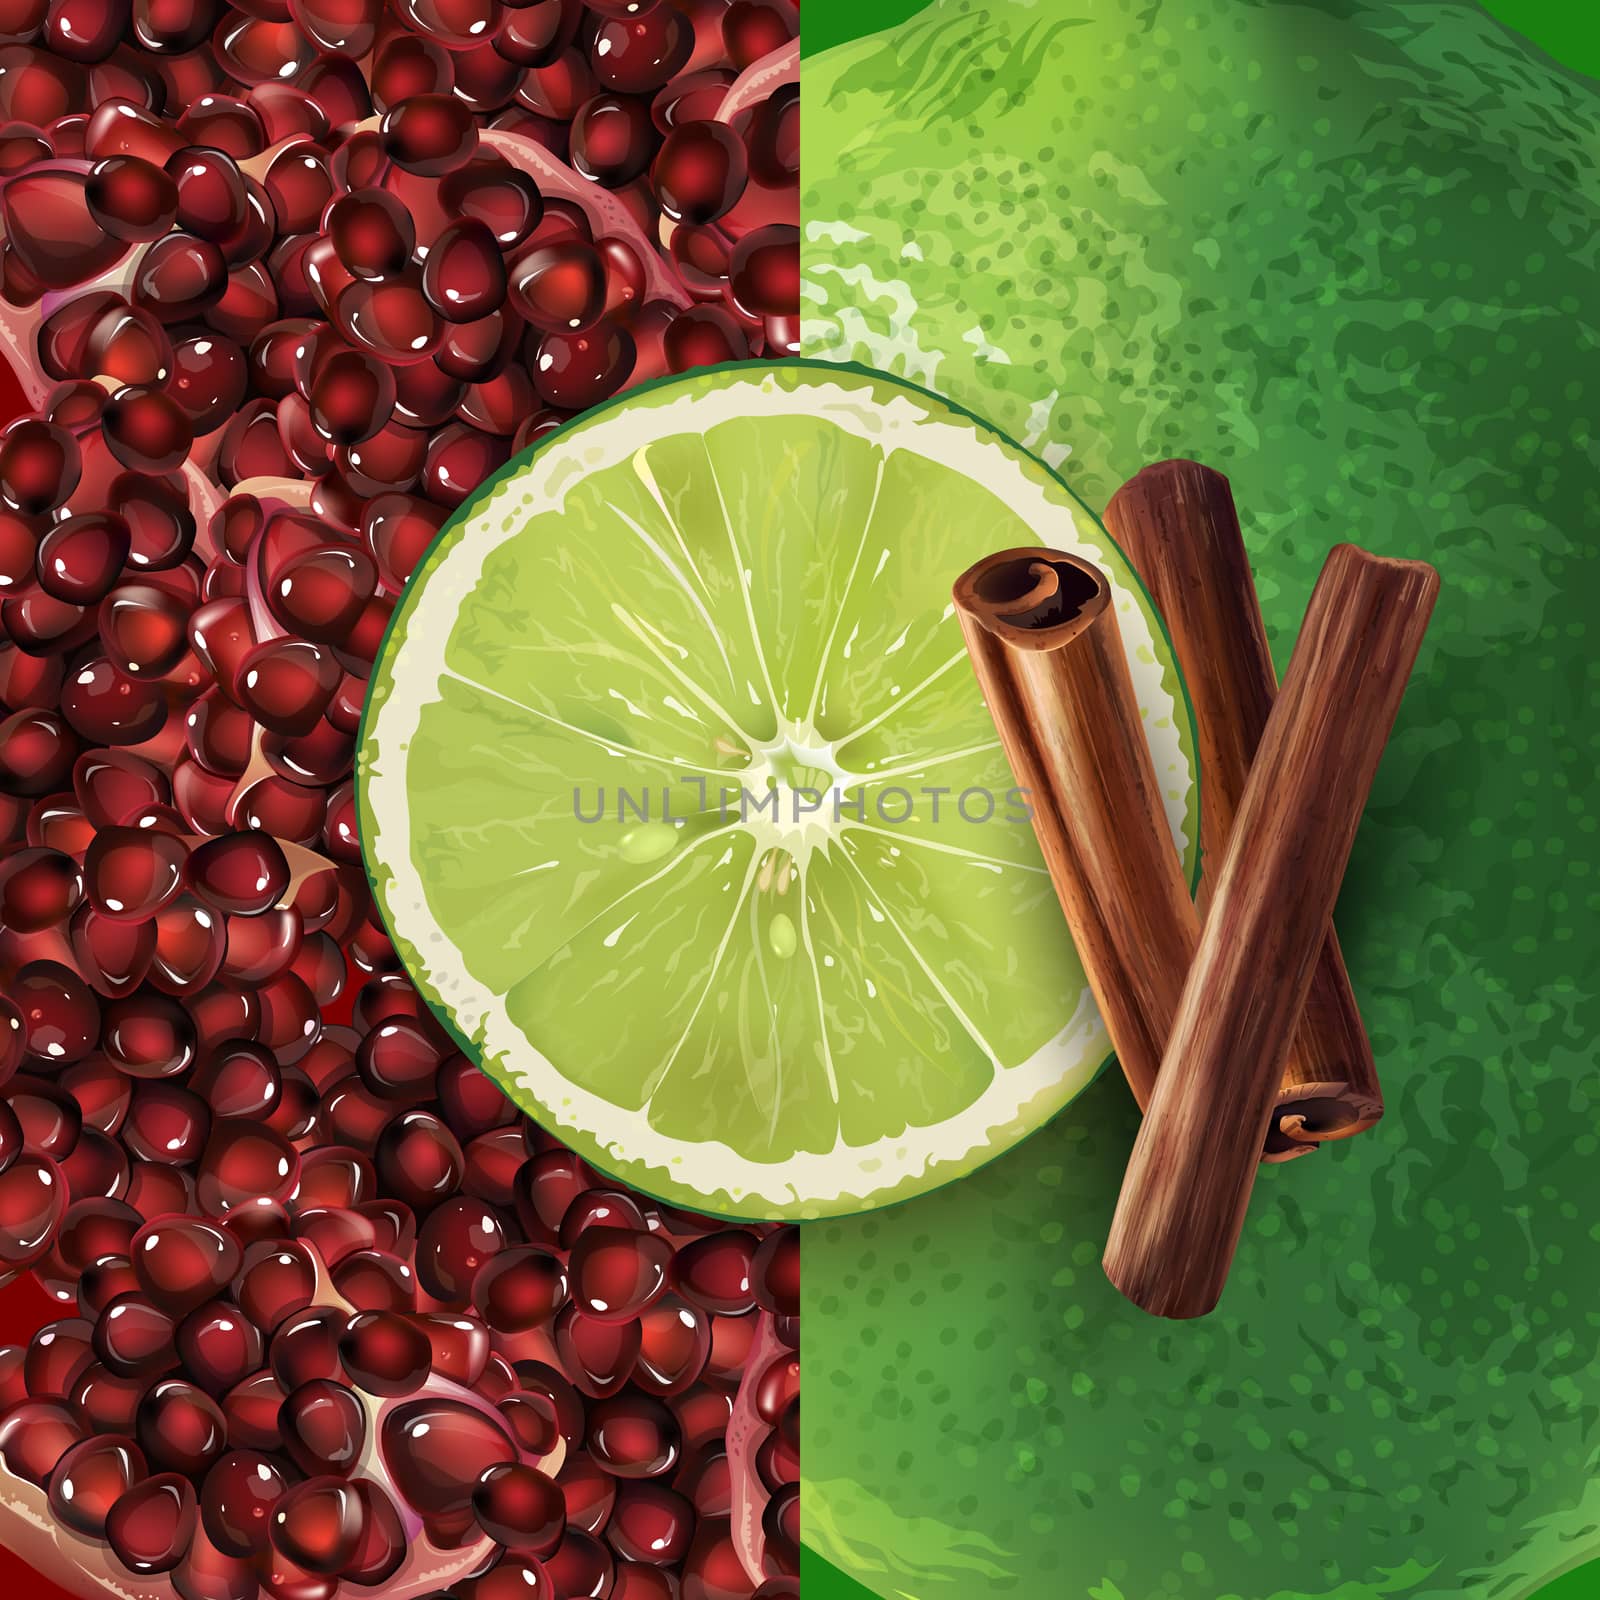 Pomegranate grain, cinnamon and lime on a background.